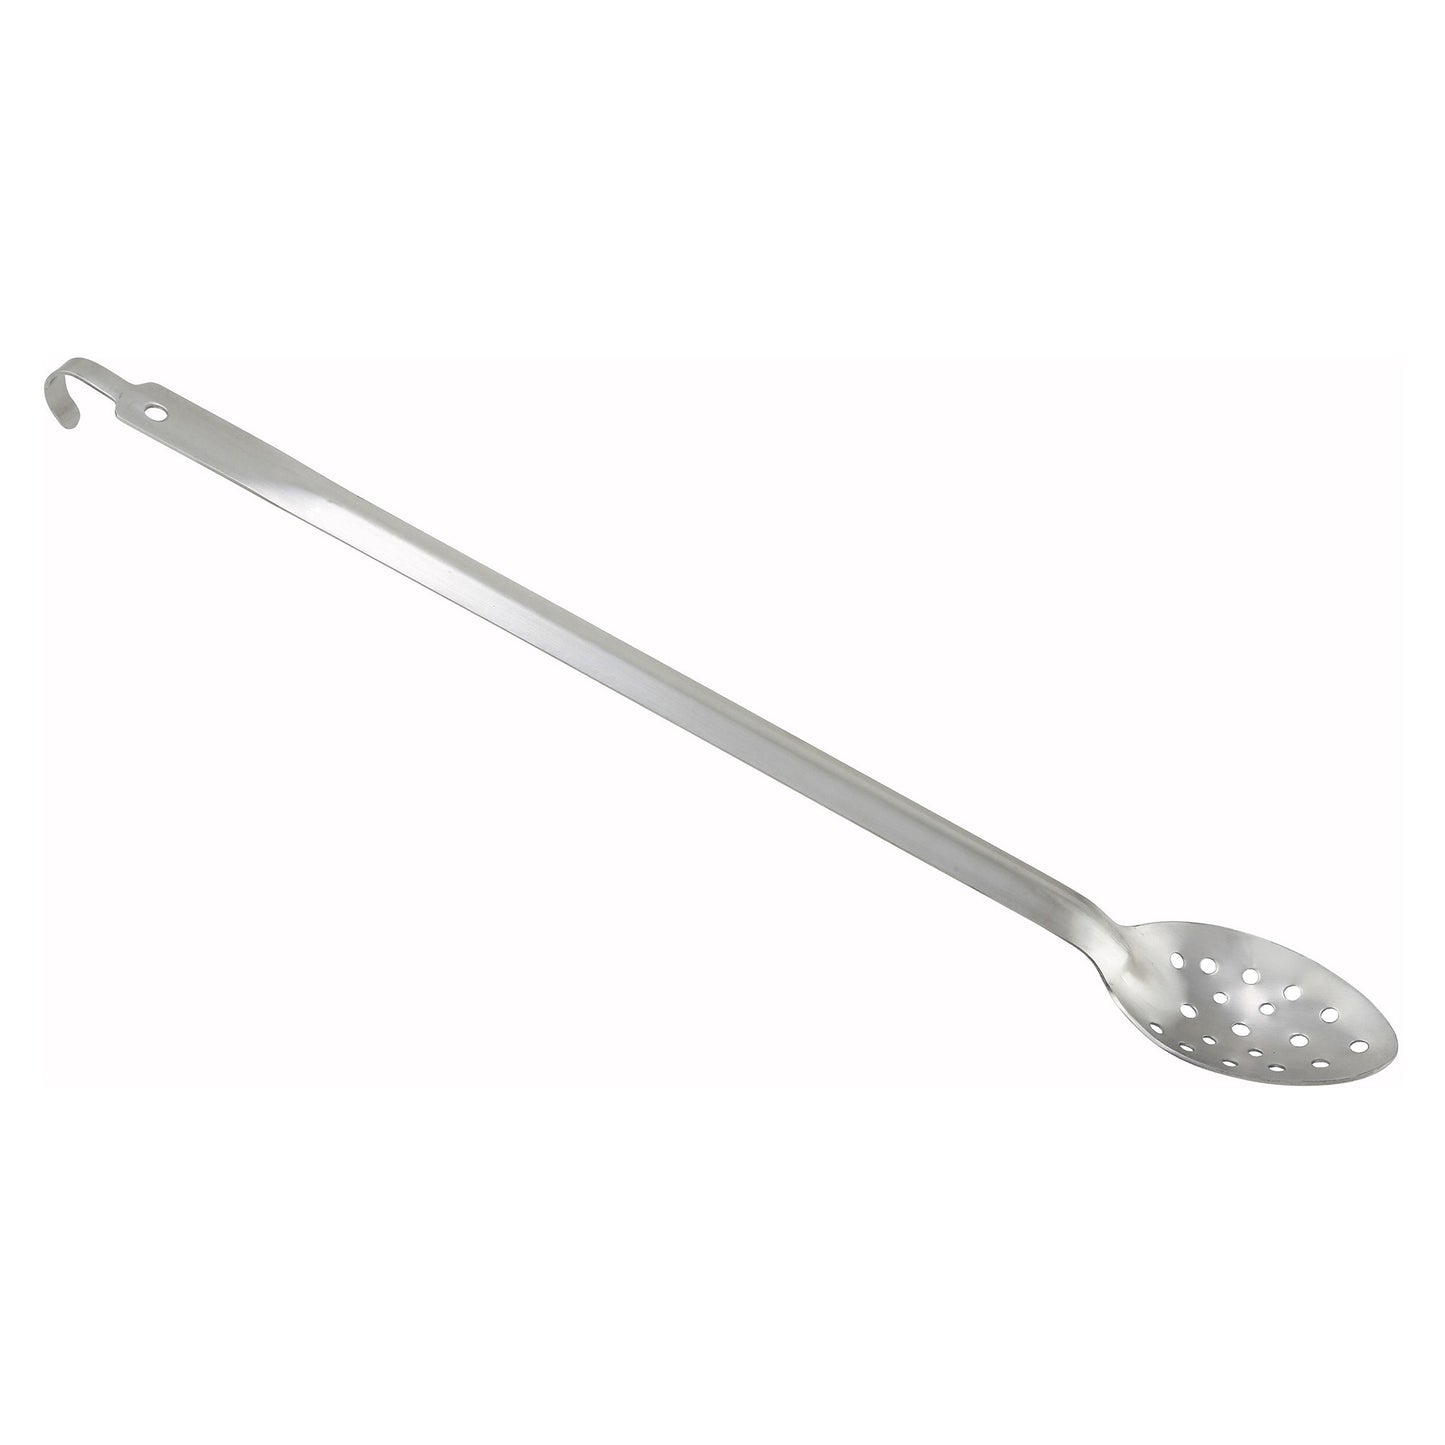 BHKP-21 - 21" Heavy-Duty Basting Spoon with Hook, 2mm - Perforated